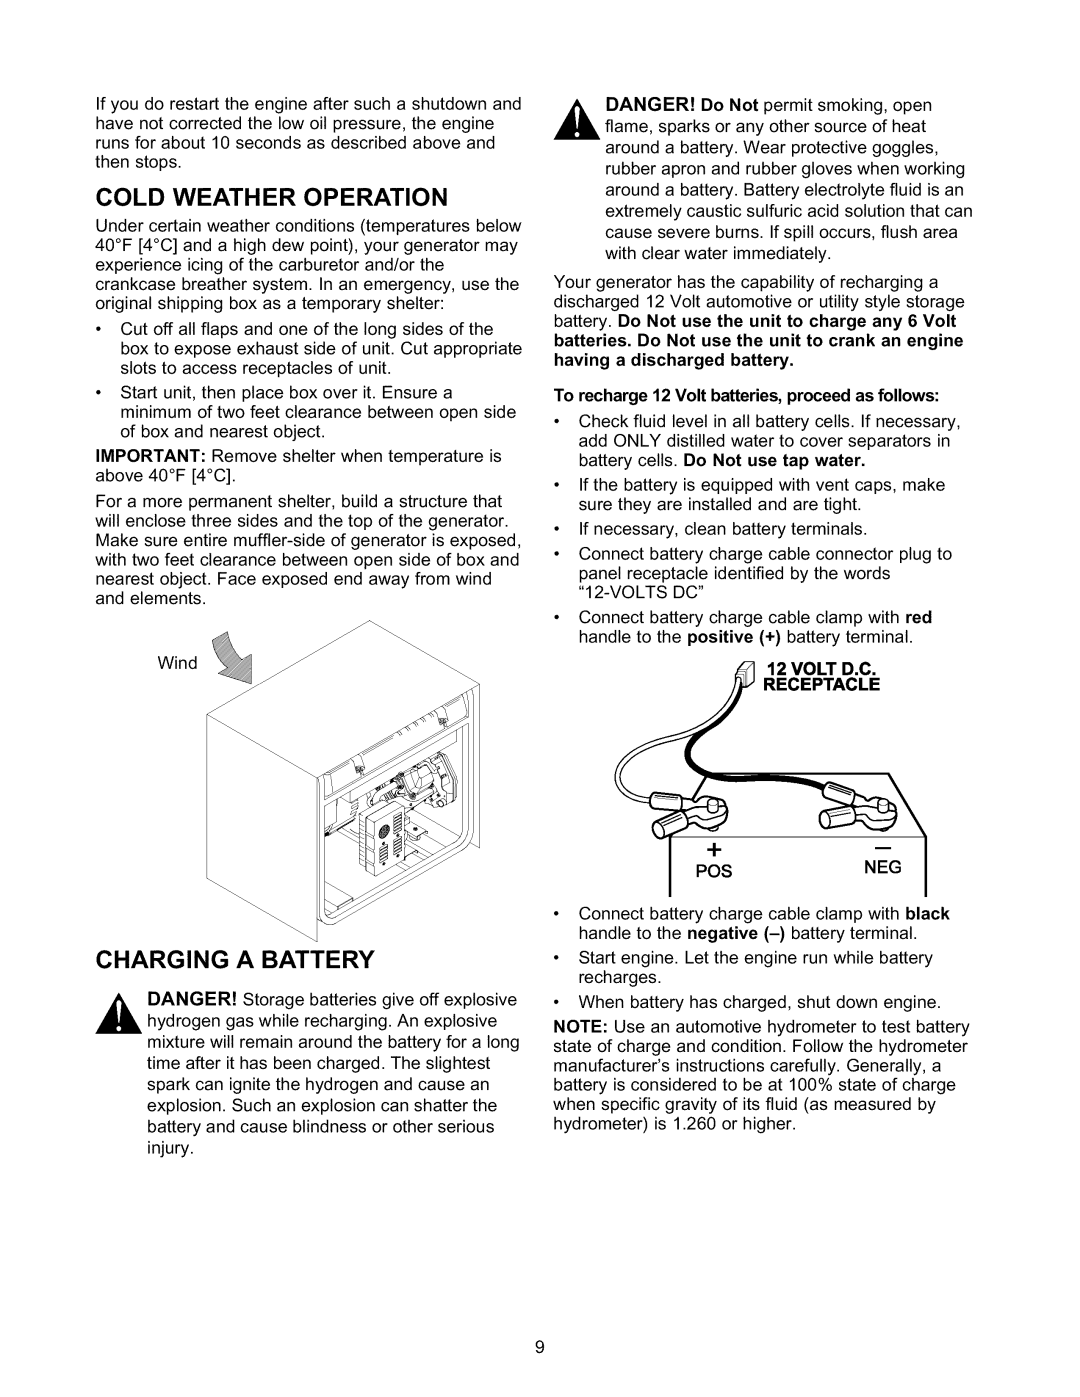 Craftsman 580.327141 owner manual thenstops COLD WEATHER OPERATION, Charging A Battery, Volt D.C Receptacle 